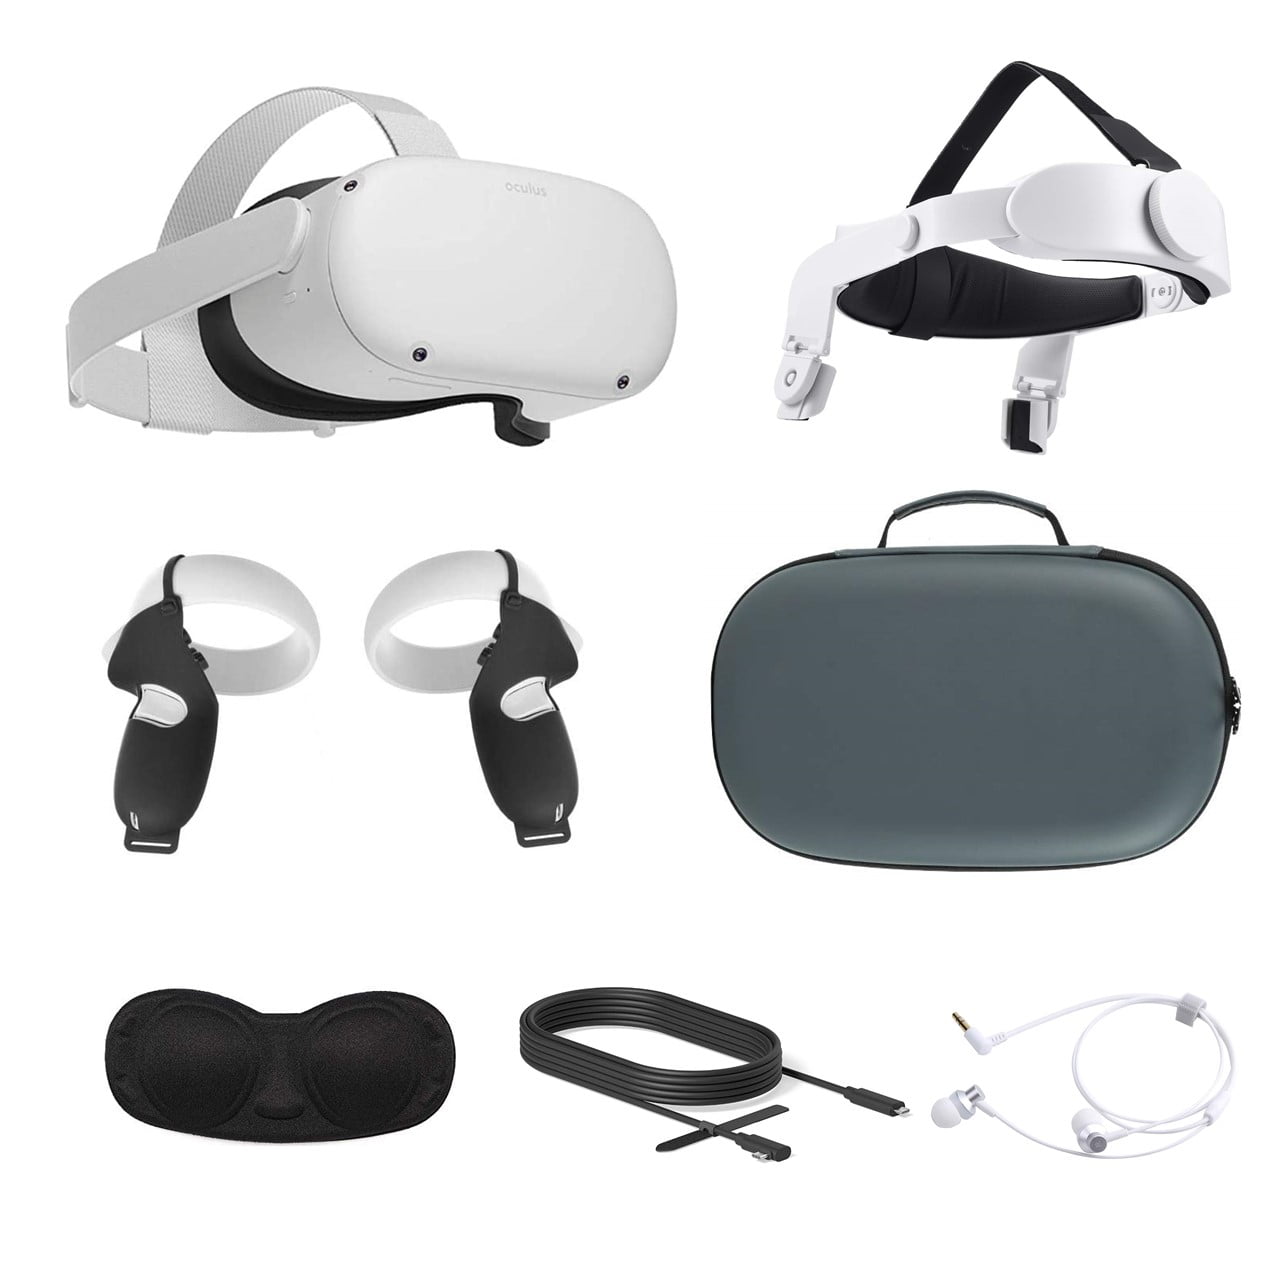 freedom poultry heart 2021 Oculus Quest 2 All-In-One VR Headset, Touch Controllers, 256GB SSD,  Glasses Compatible, 3D Audio, Mytrix Head Strap, Carrying Case, Earphone,  Link Cable (3M), Grip Cover, Lens Cover - Walmart.com